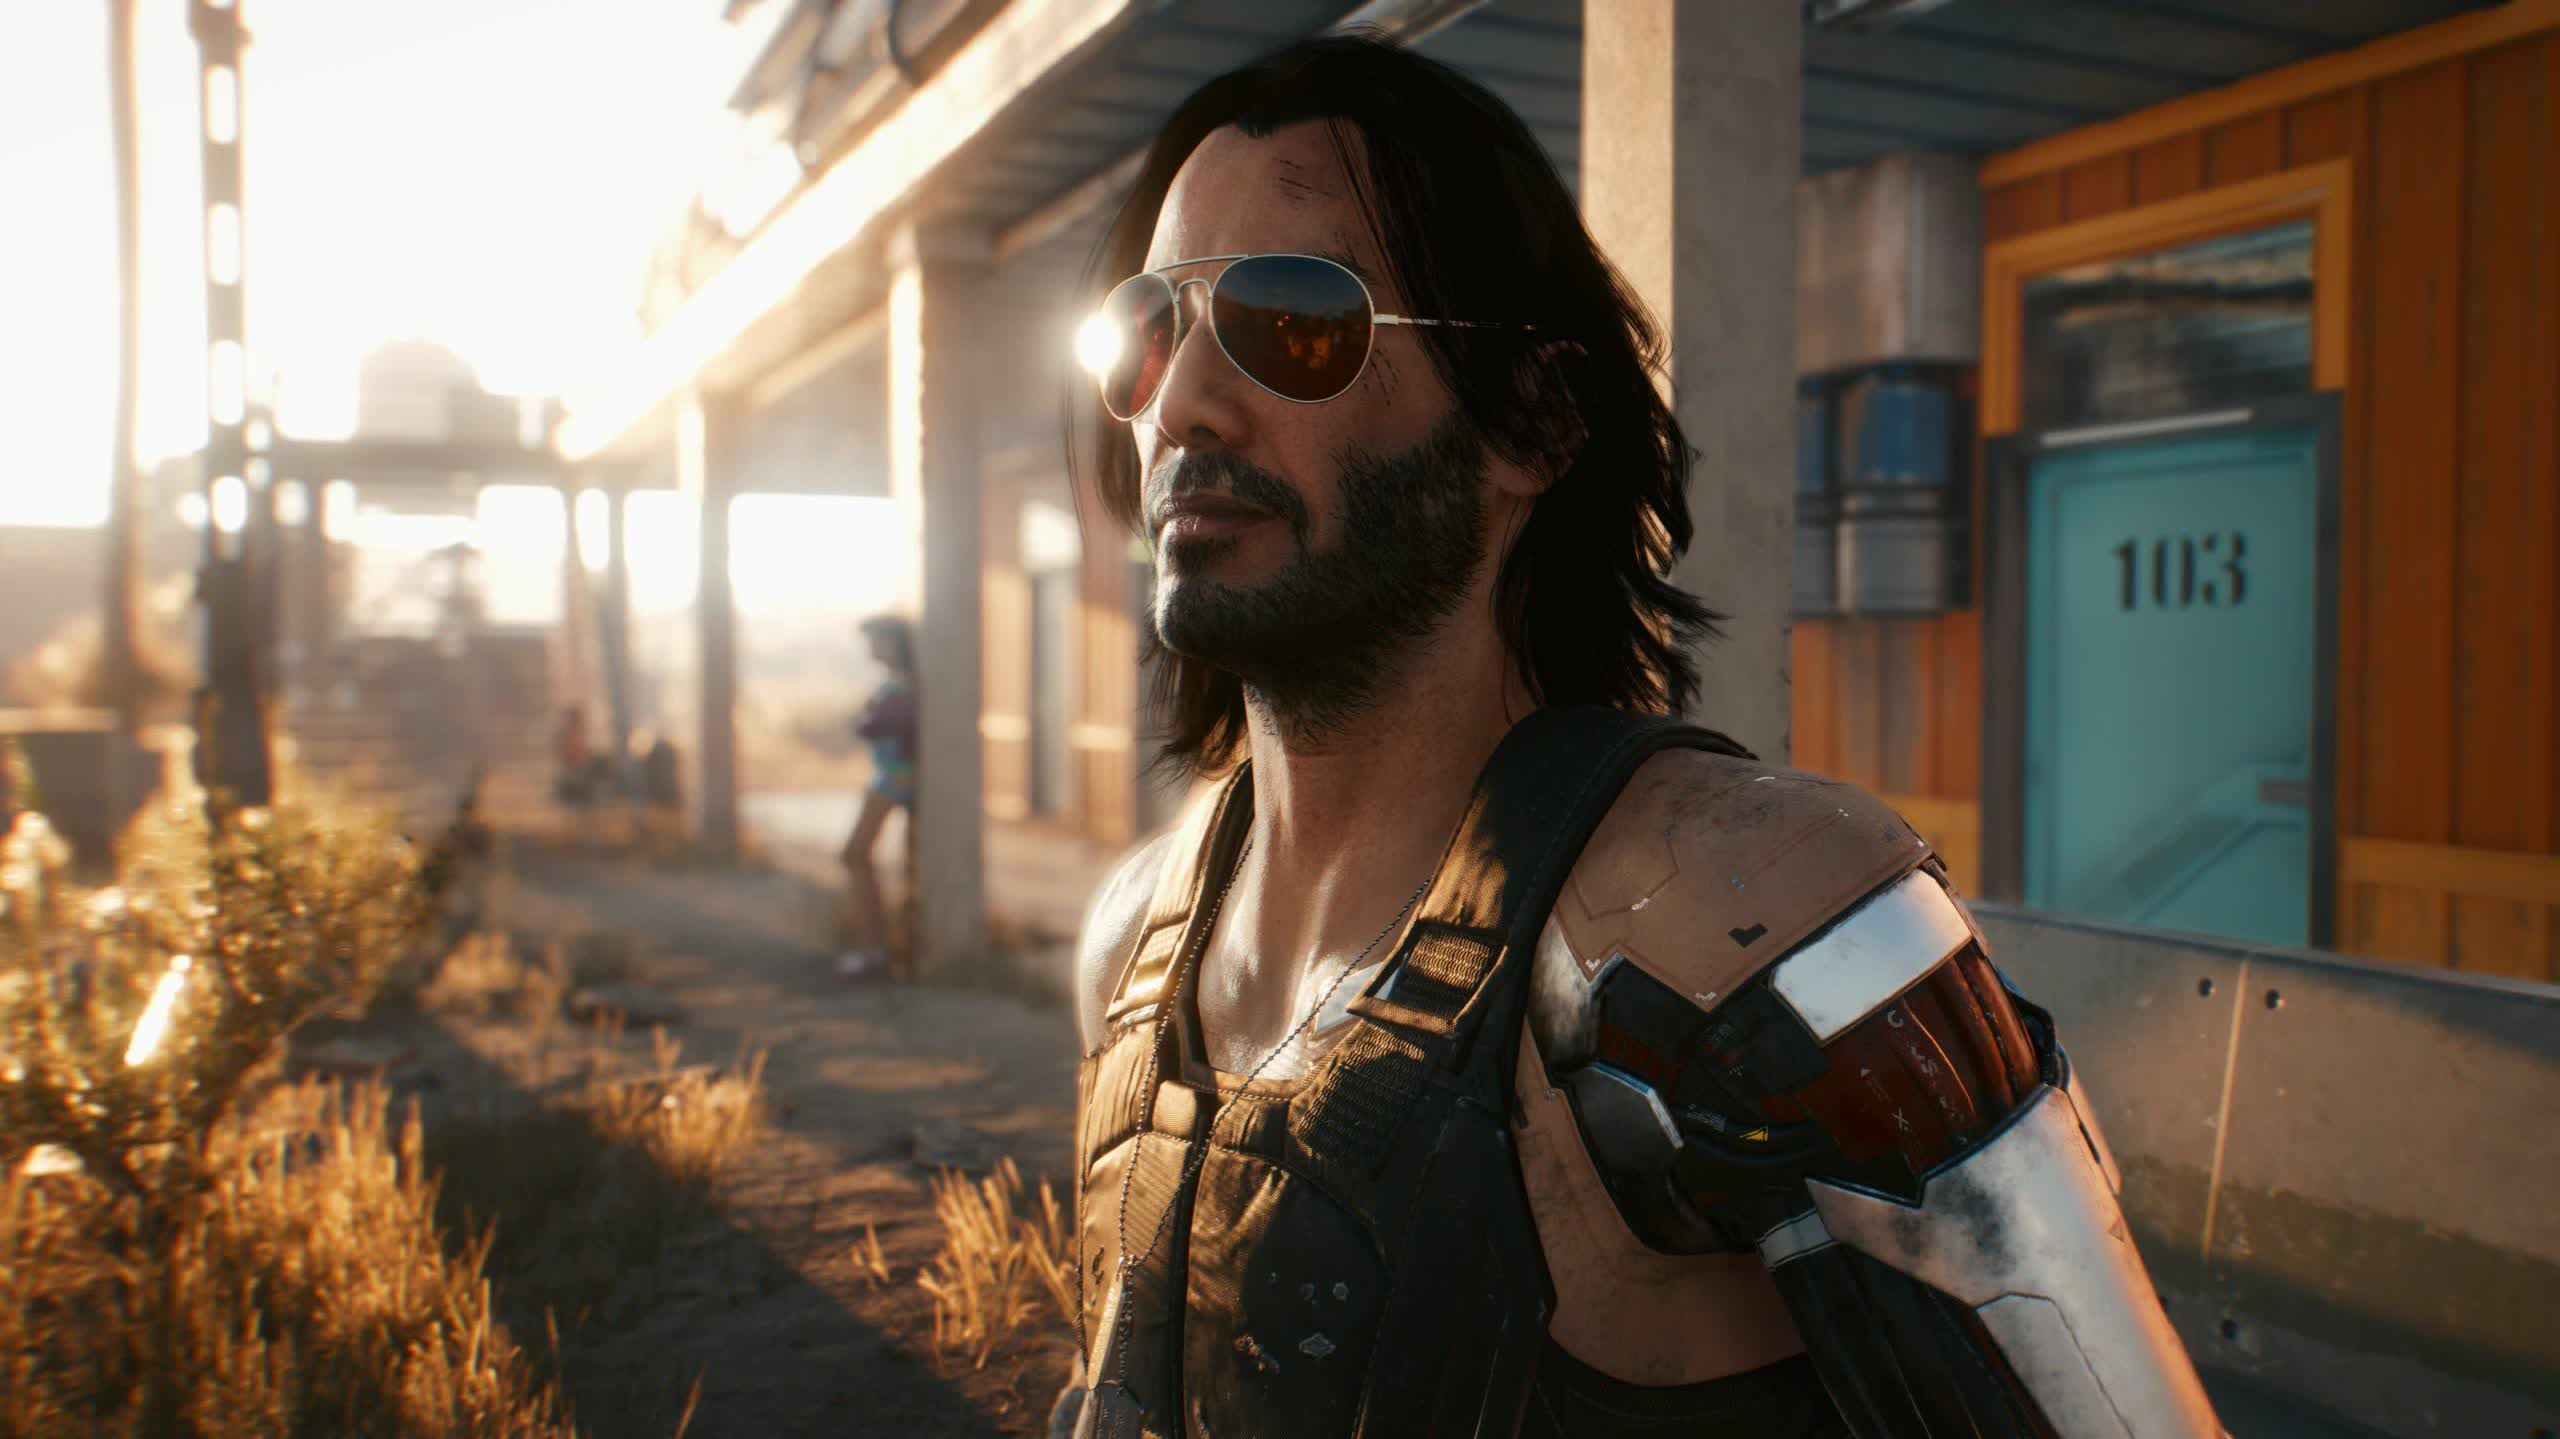 How did the Cyberpunk 2077 dumpster fire become one of 2021's most played games?